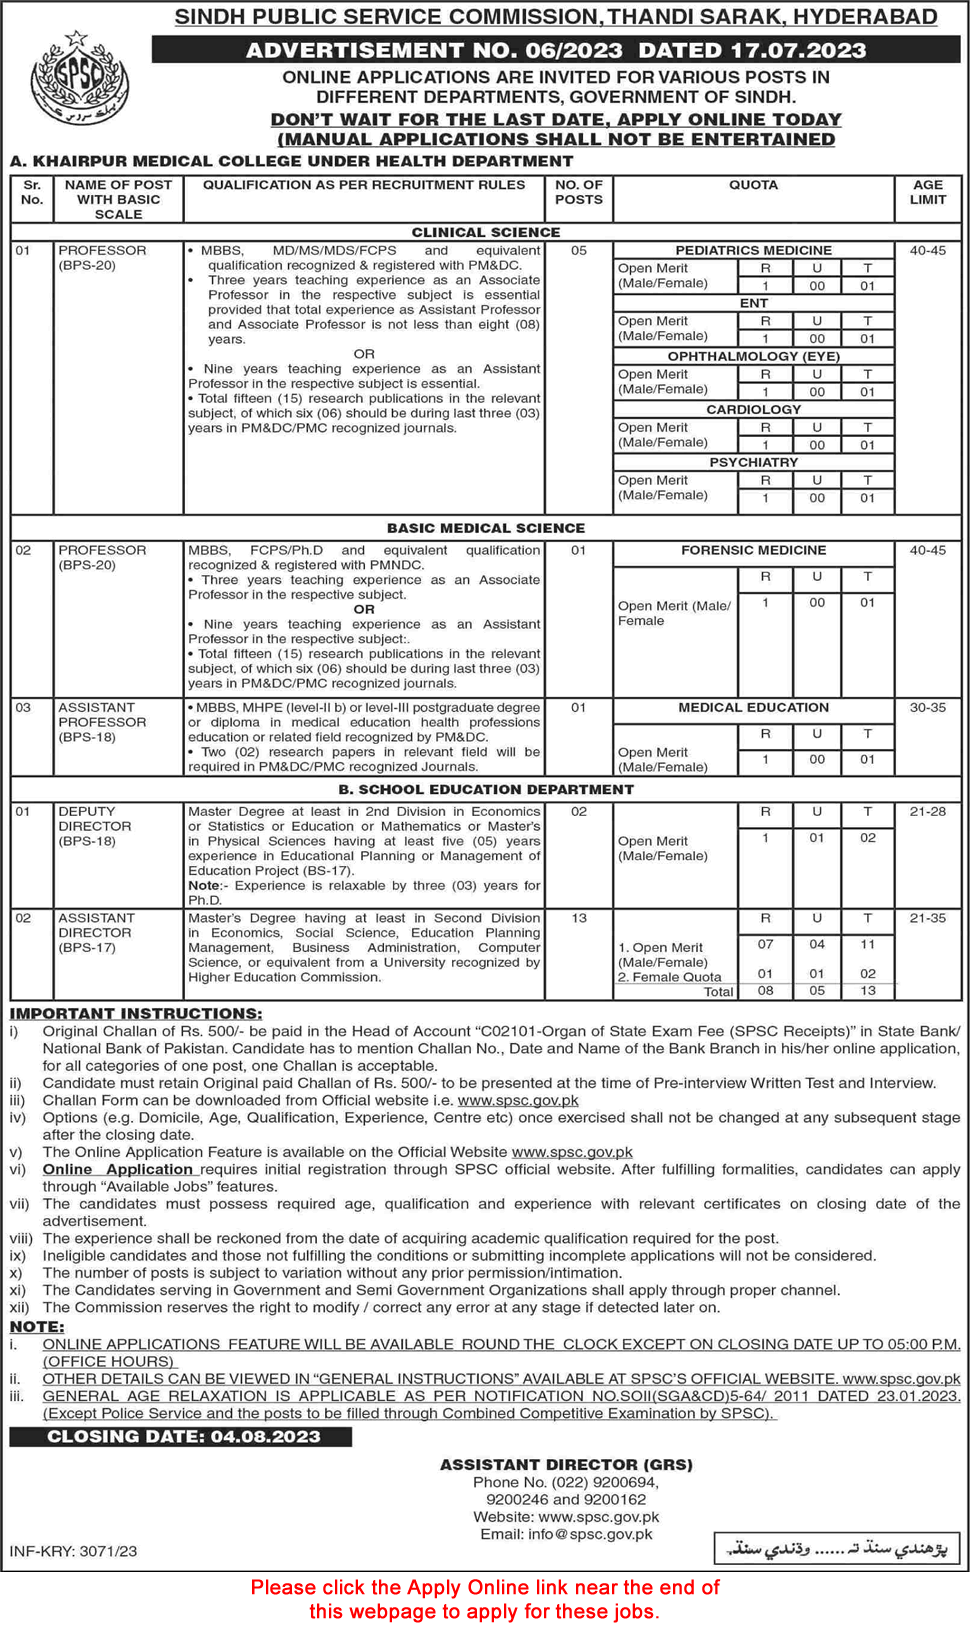 SPSC Jobs July 2023 Apply Online Consolidated Advertisement No 06/2023 6/2023 Latest